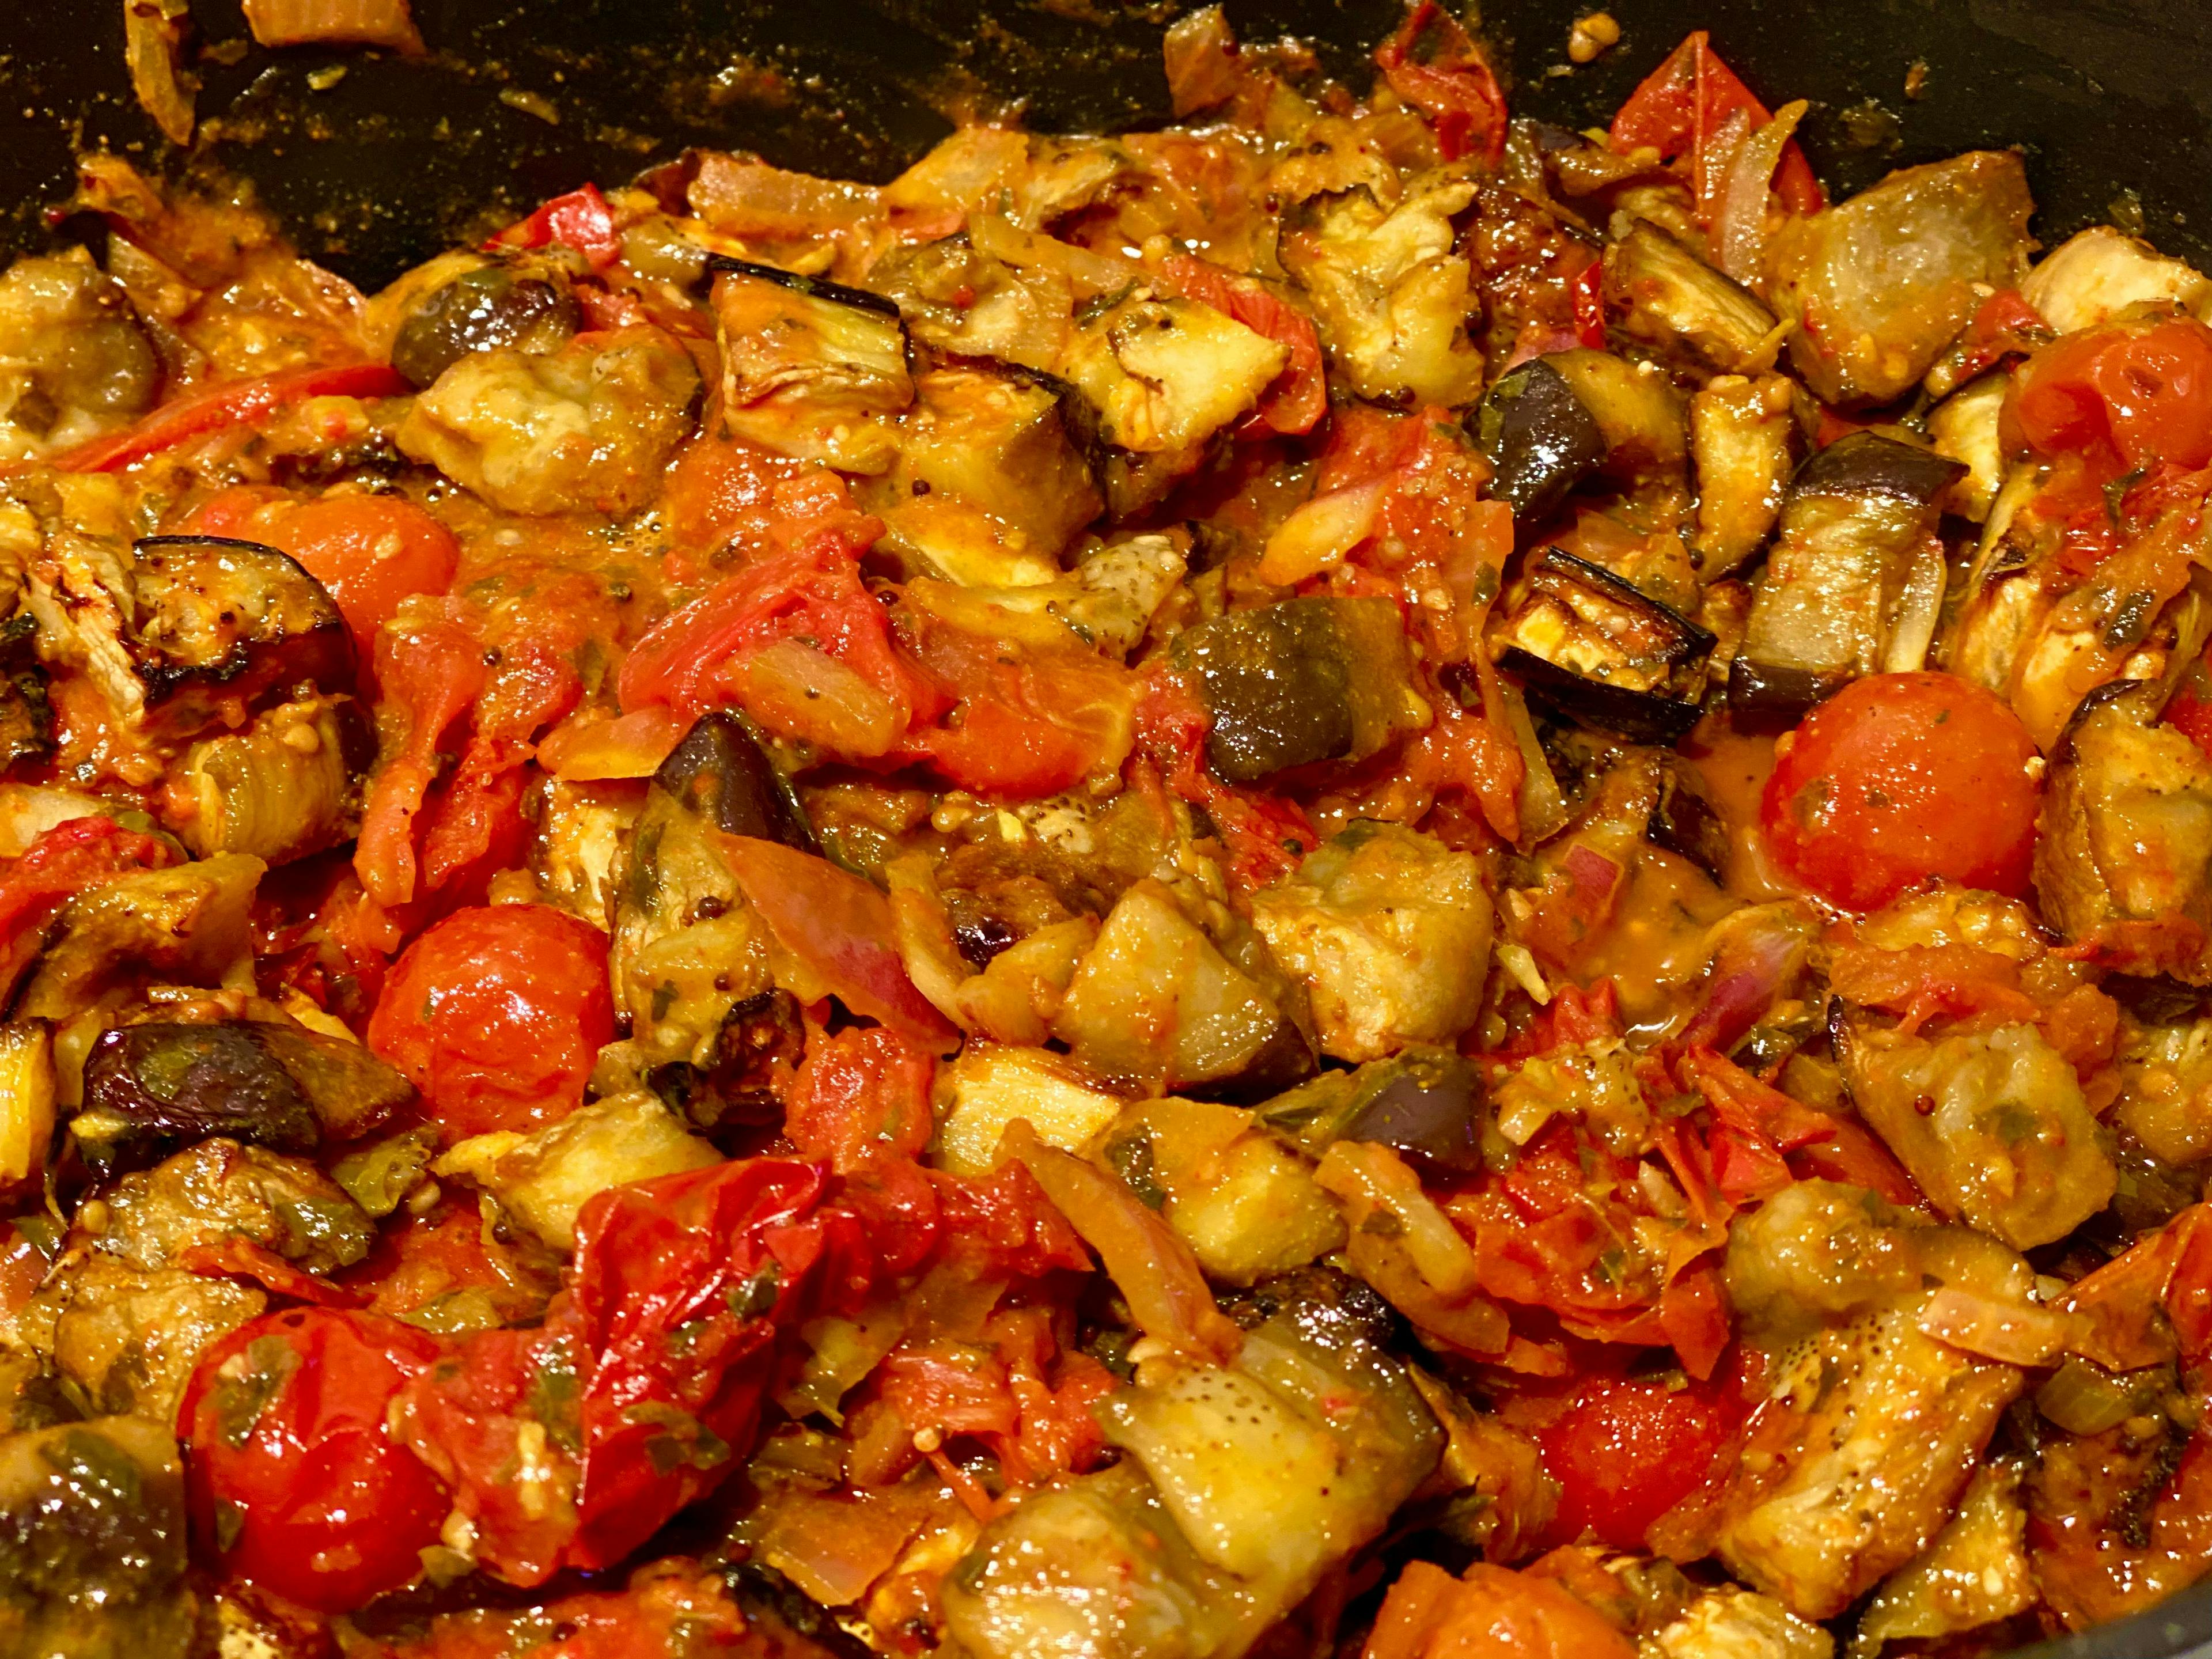 aubergines, tomatoes and onion mix gently stirred together